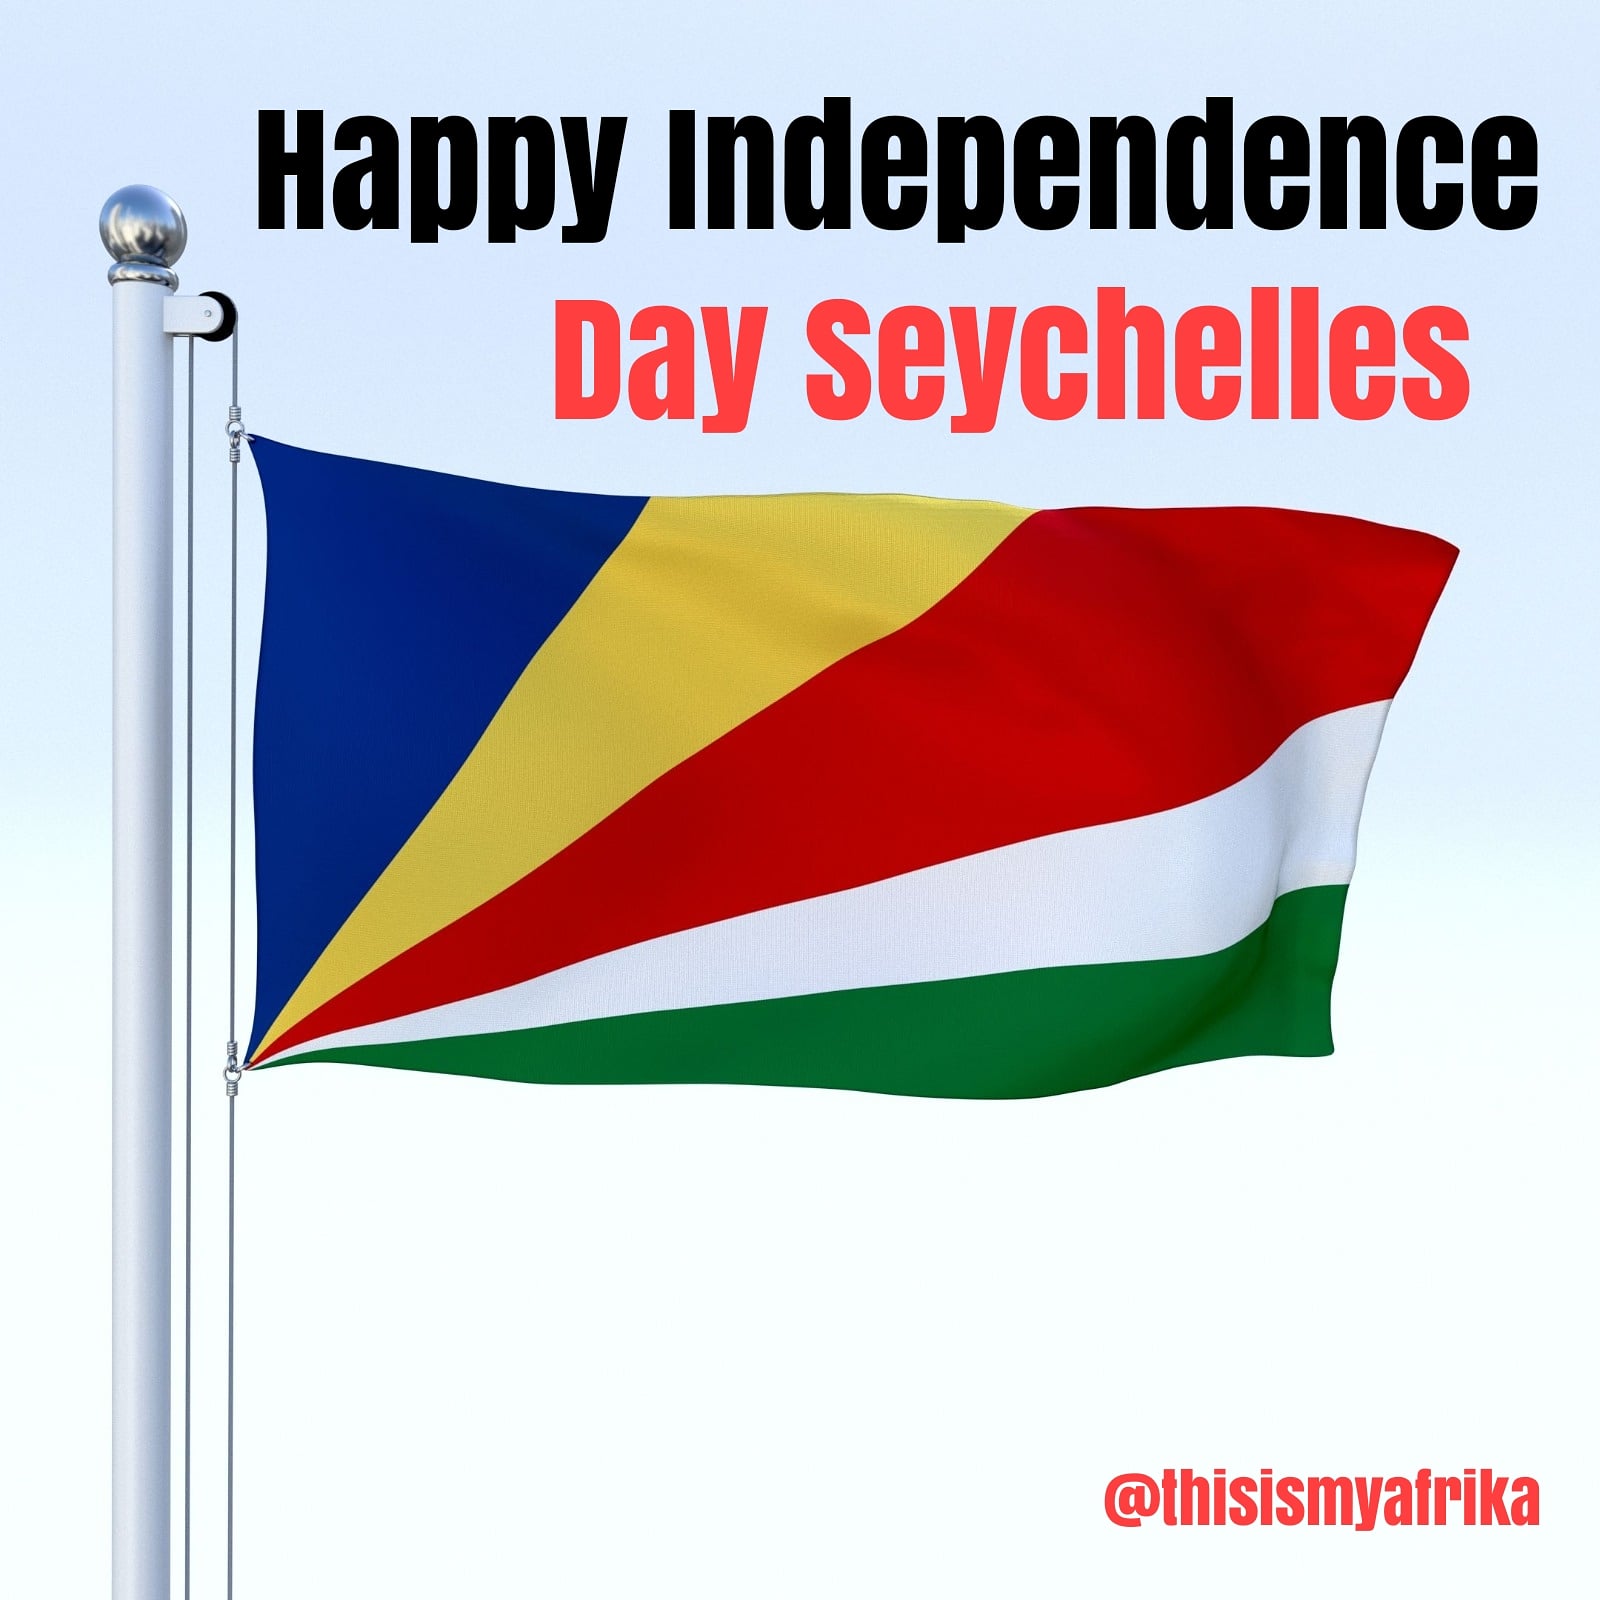 This Is My Africa on Twitter: "Happy Independence Day Seychelles 🇸🇨 #seychelles #seychellesislands https://t.co/OiEiP4kQ3V" / Twitter